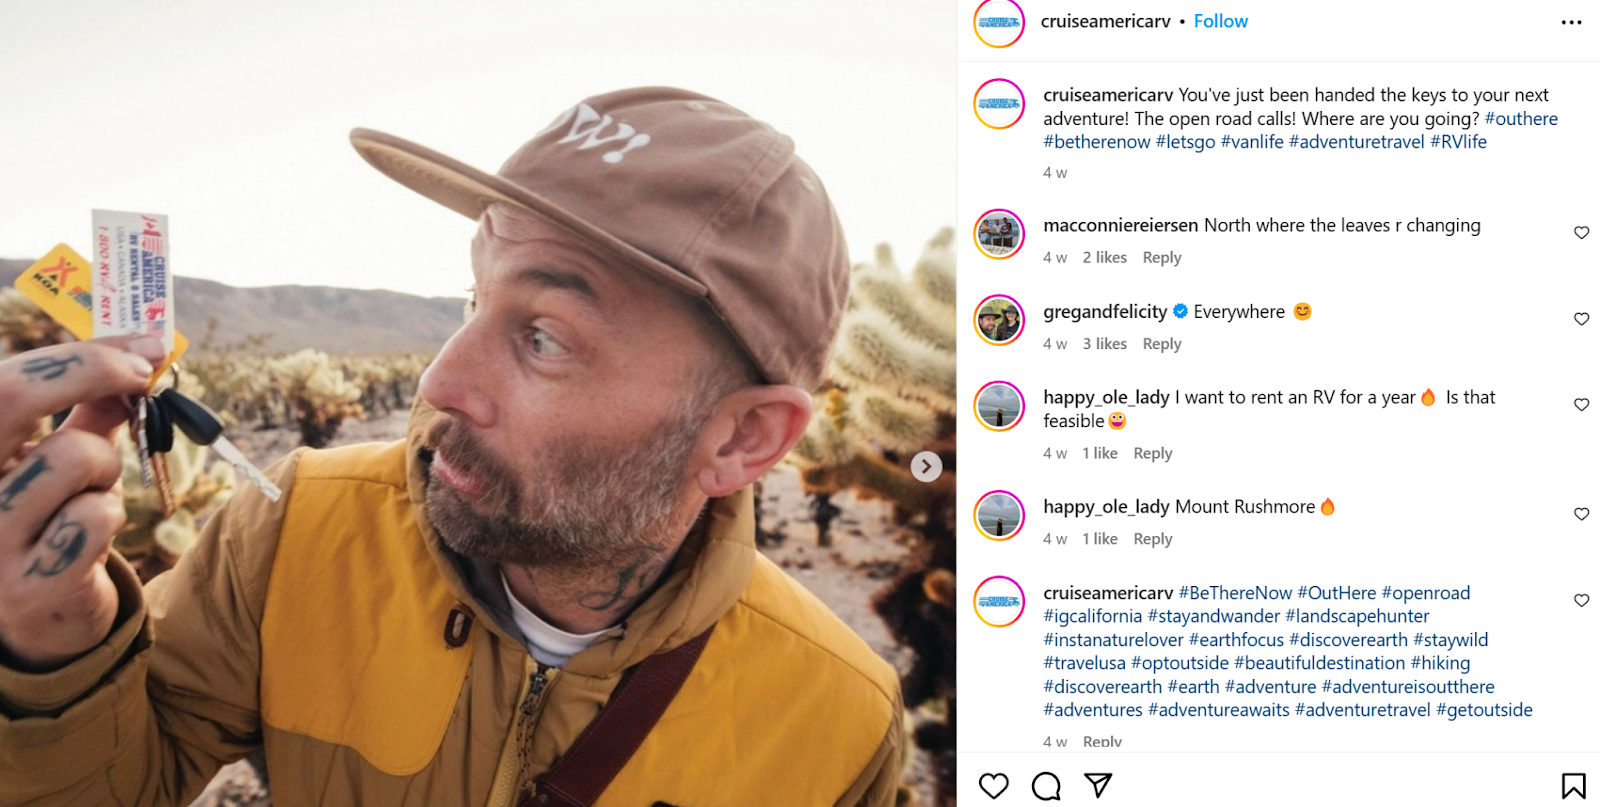 Cruise America's partnership with influencers